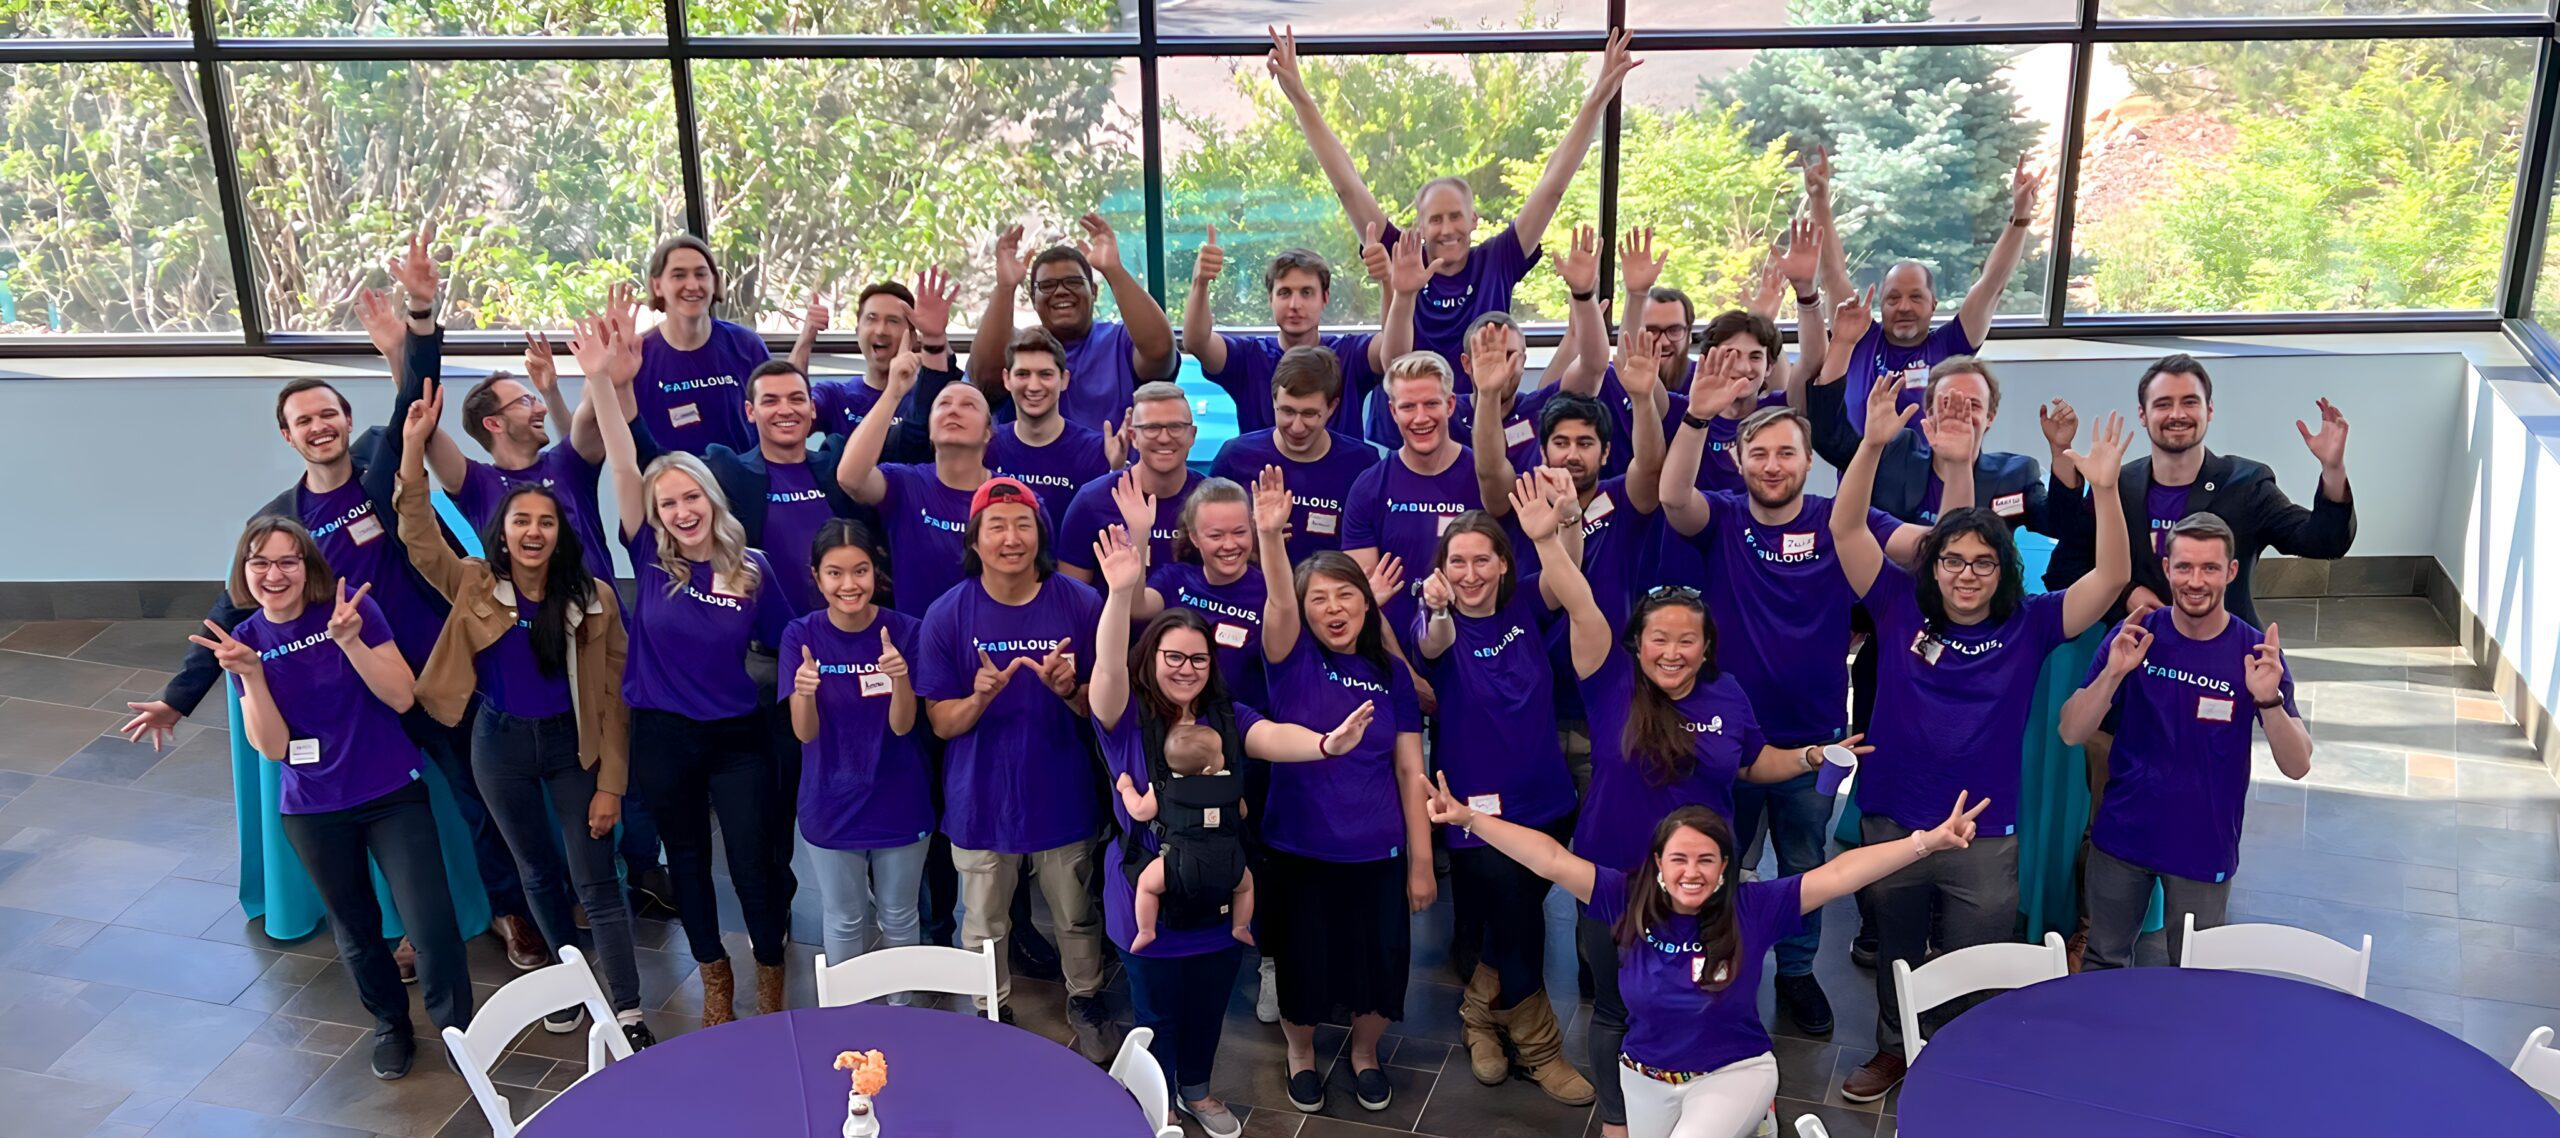 Orbit Fab team wearing purple "Fabulous" shirts stands with hands outstreached.